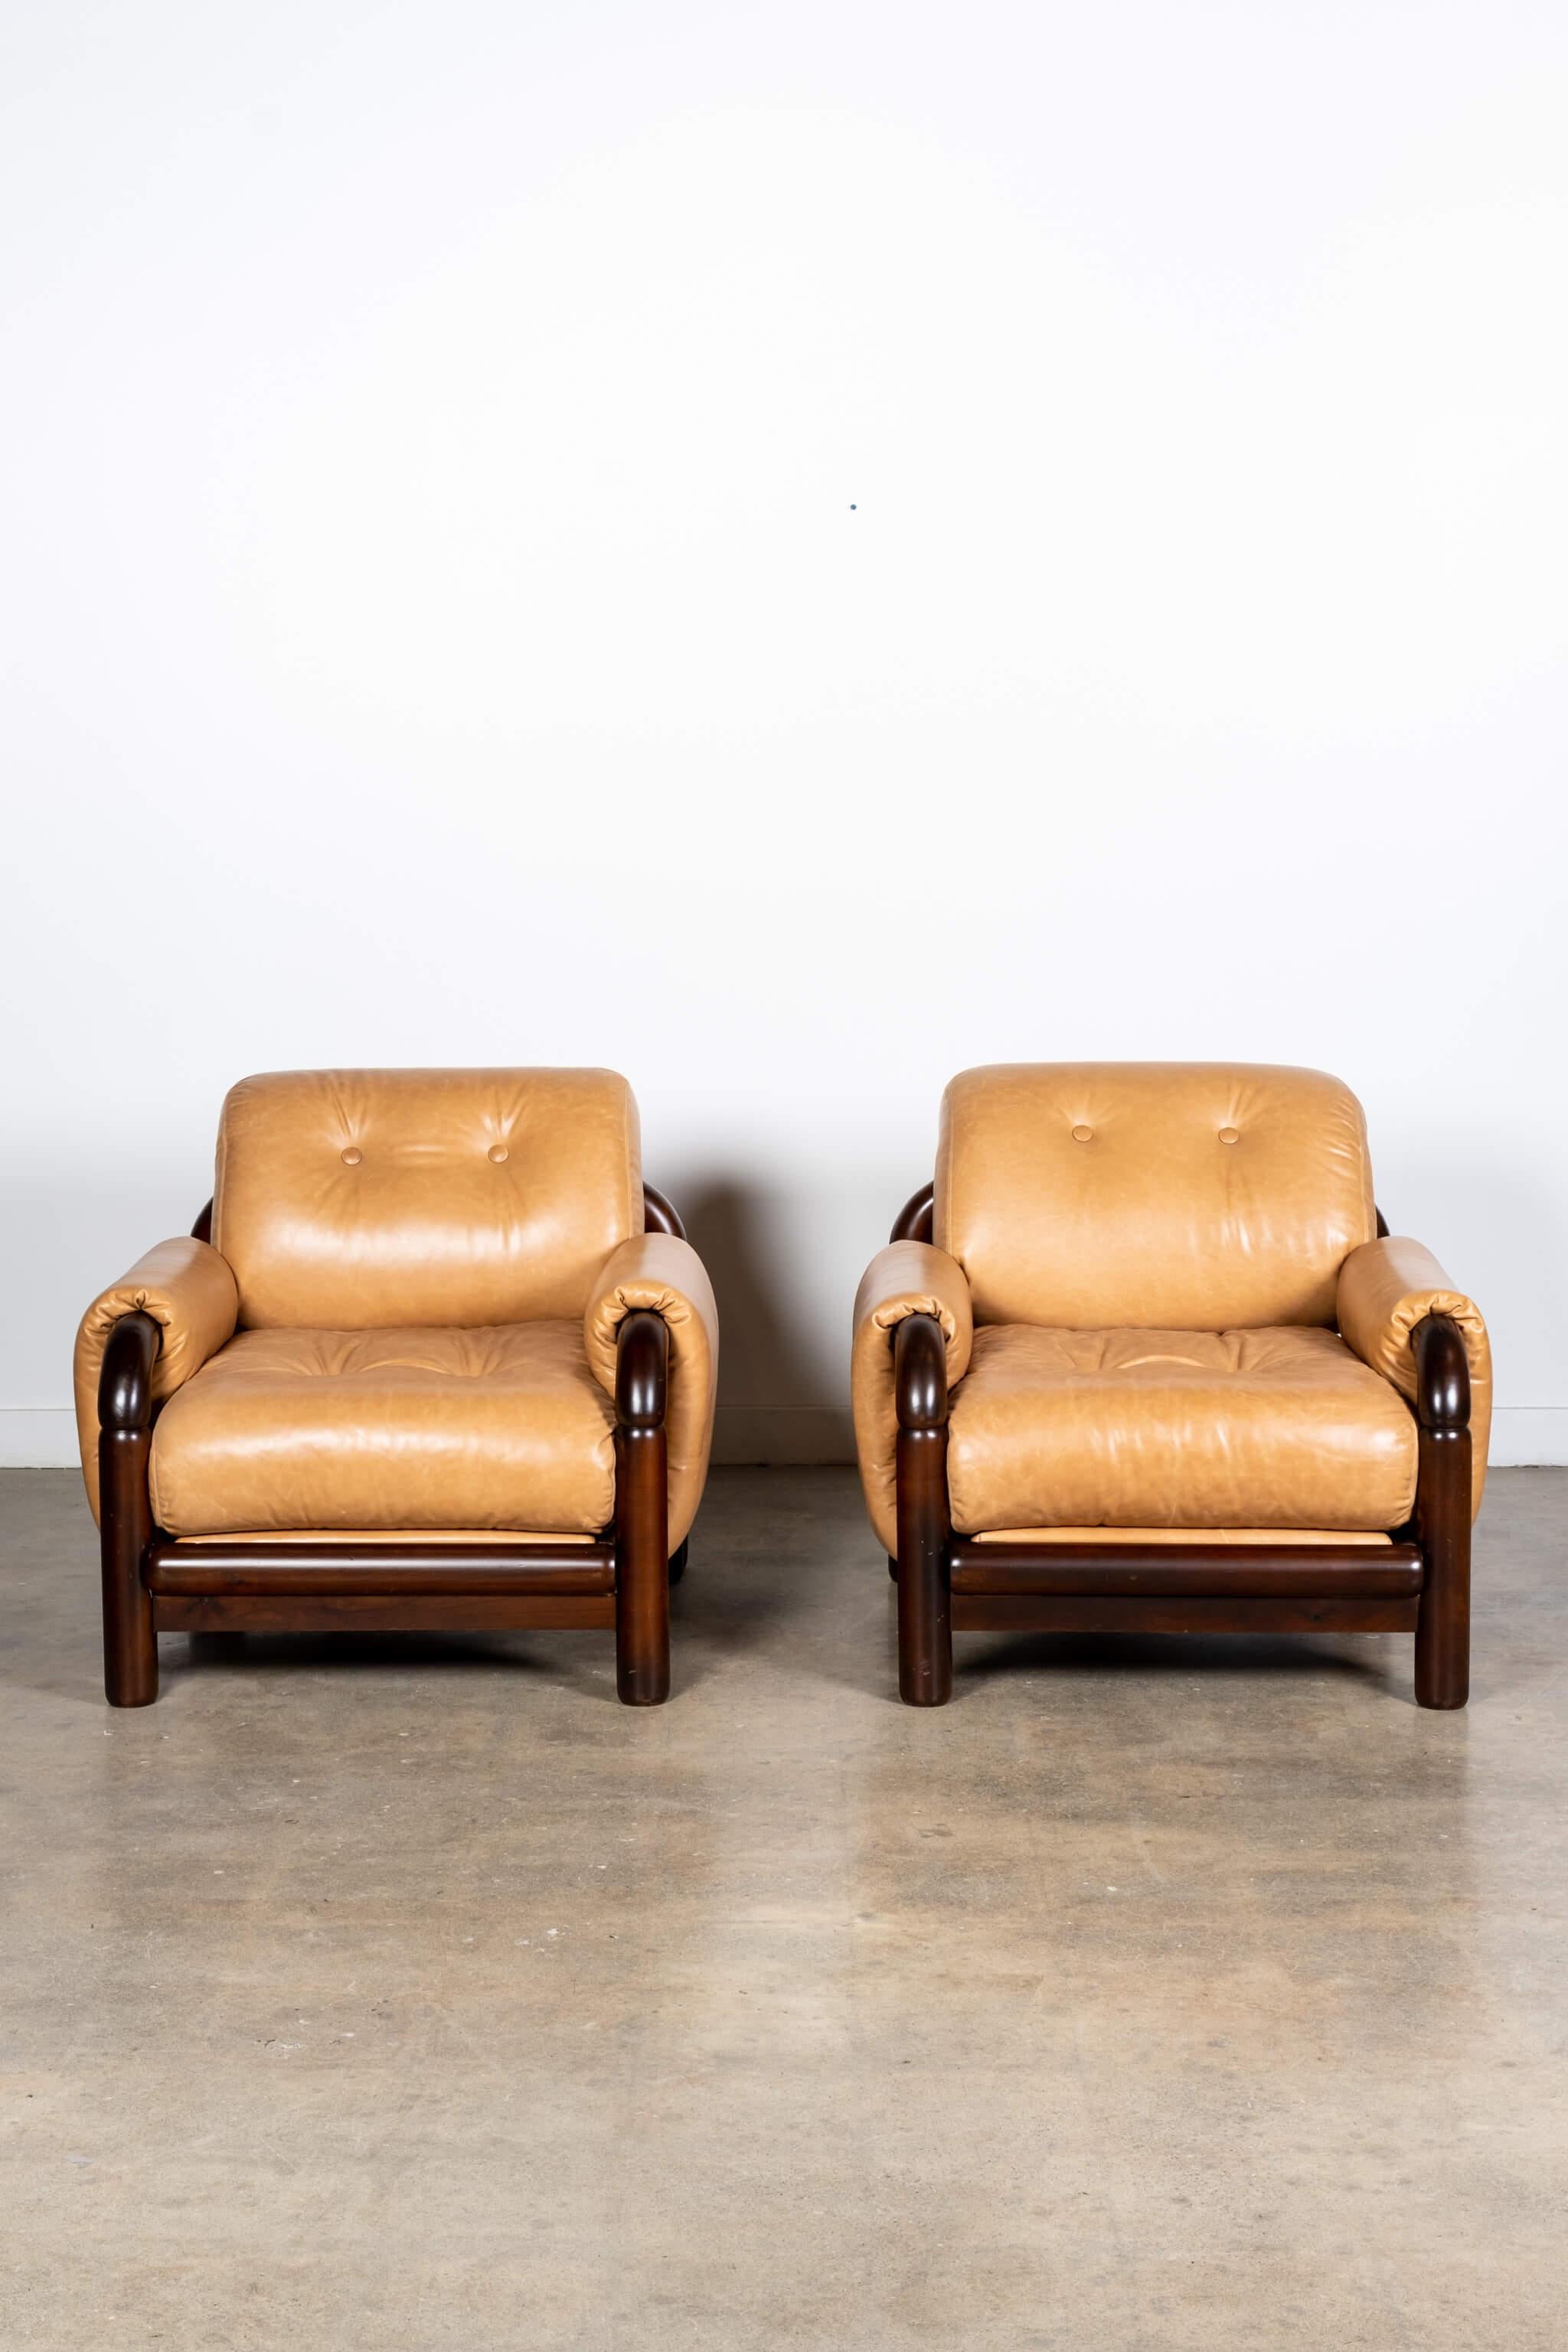 Soft caramel leather wraps and curves over the tubular wood frame of these substantial yet sophisticated armchairs that strike a chord from any angle. Suspected 1970s production, unmarked. Brazilian wood and leather.